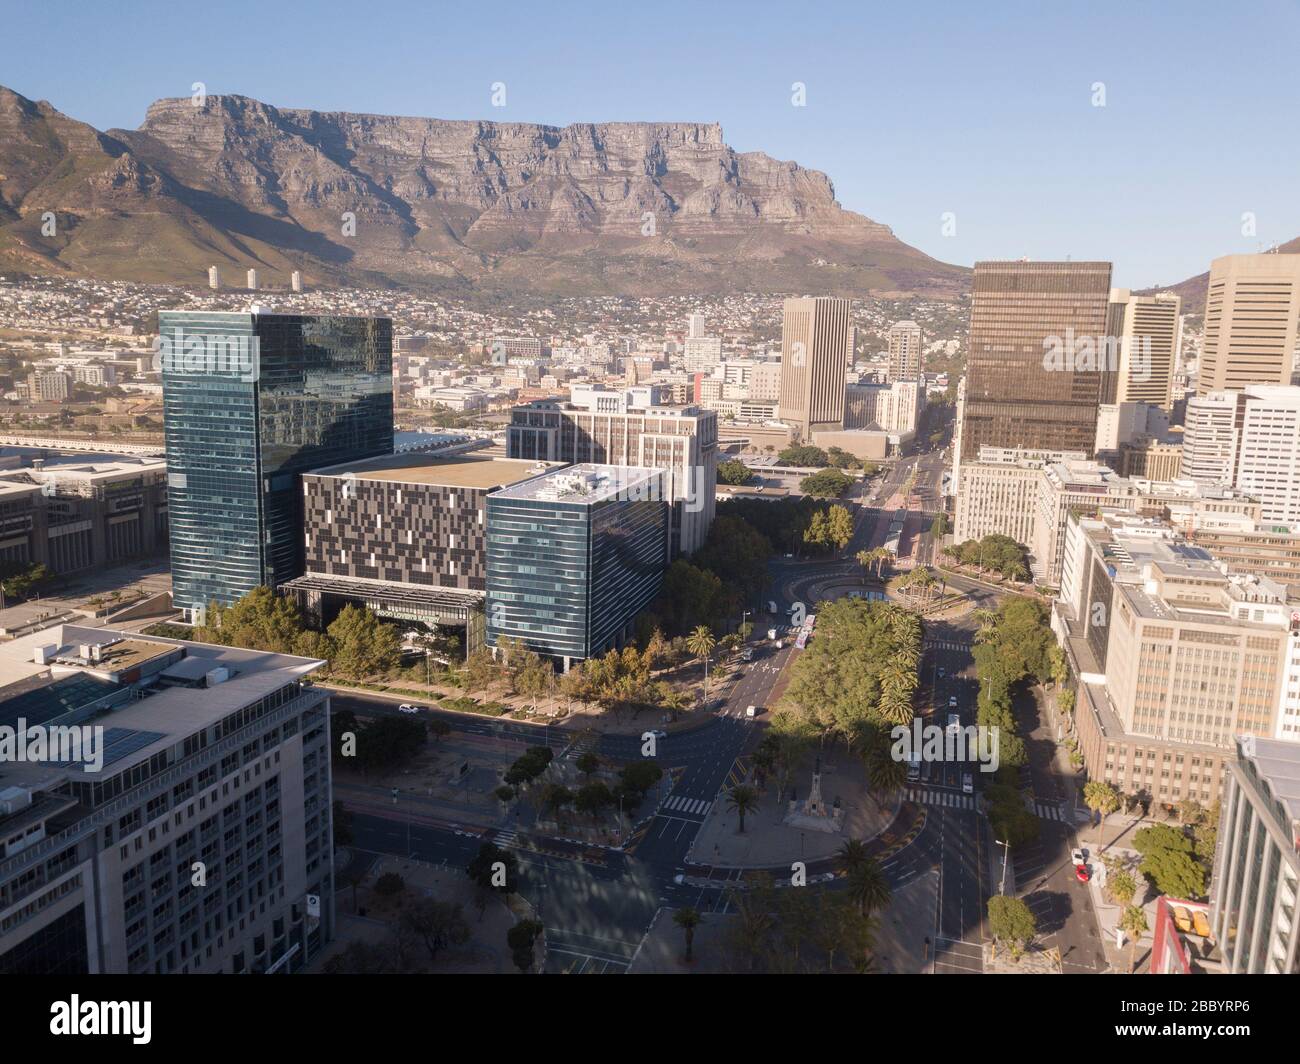 2 April 2020 - Cape Town, South Africa: Aerial view of empty streets in Cape Town, South Africa during the Covid 19 lockdown. Stock Photo